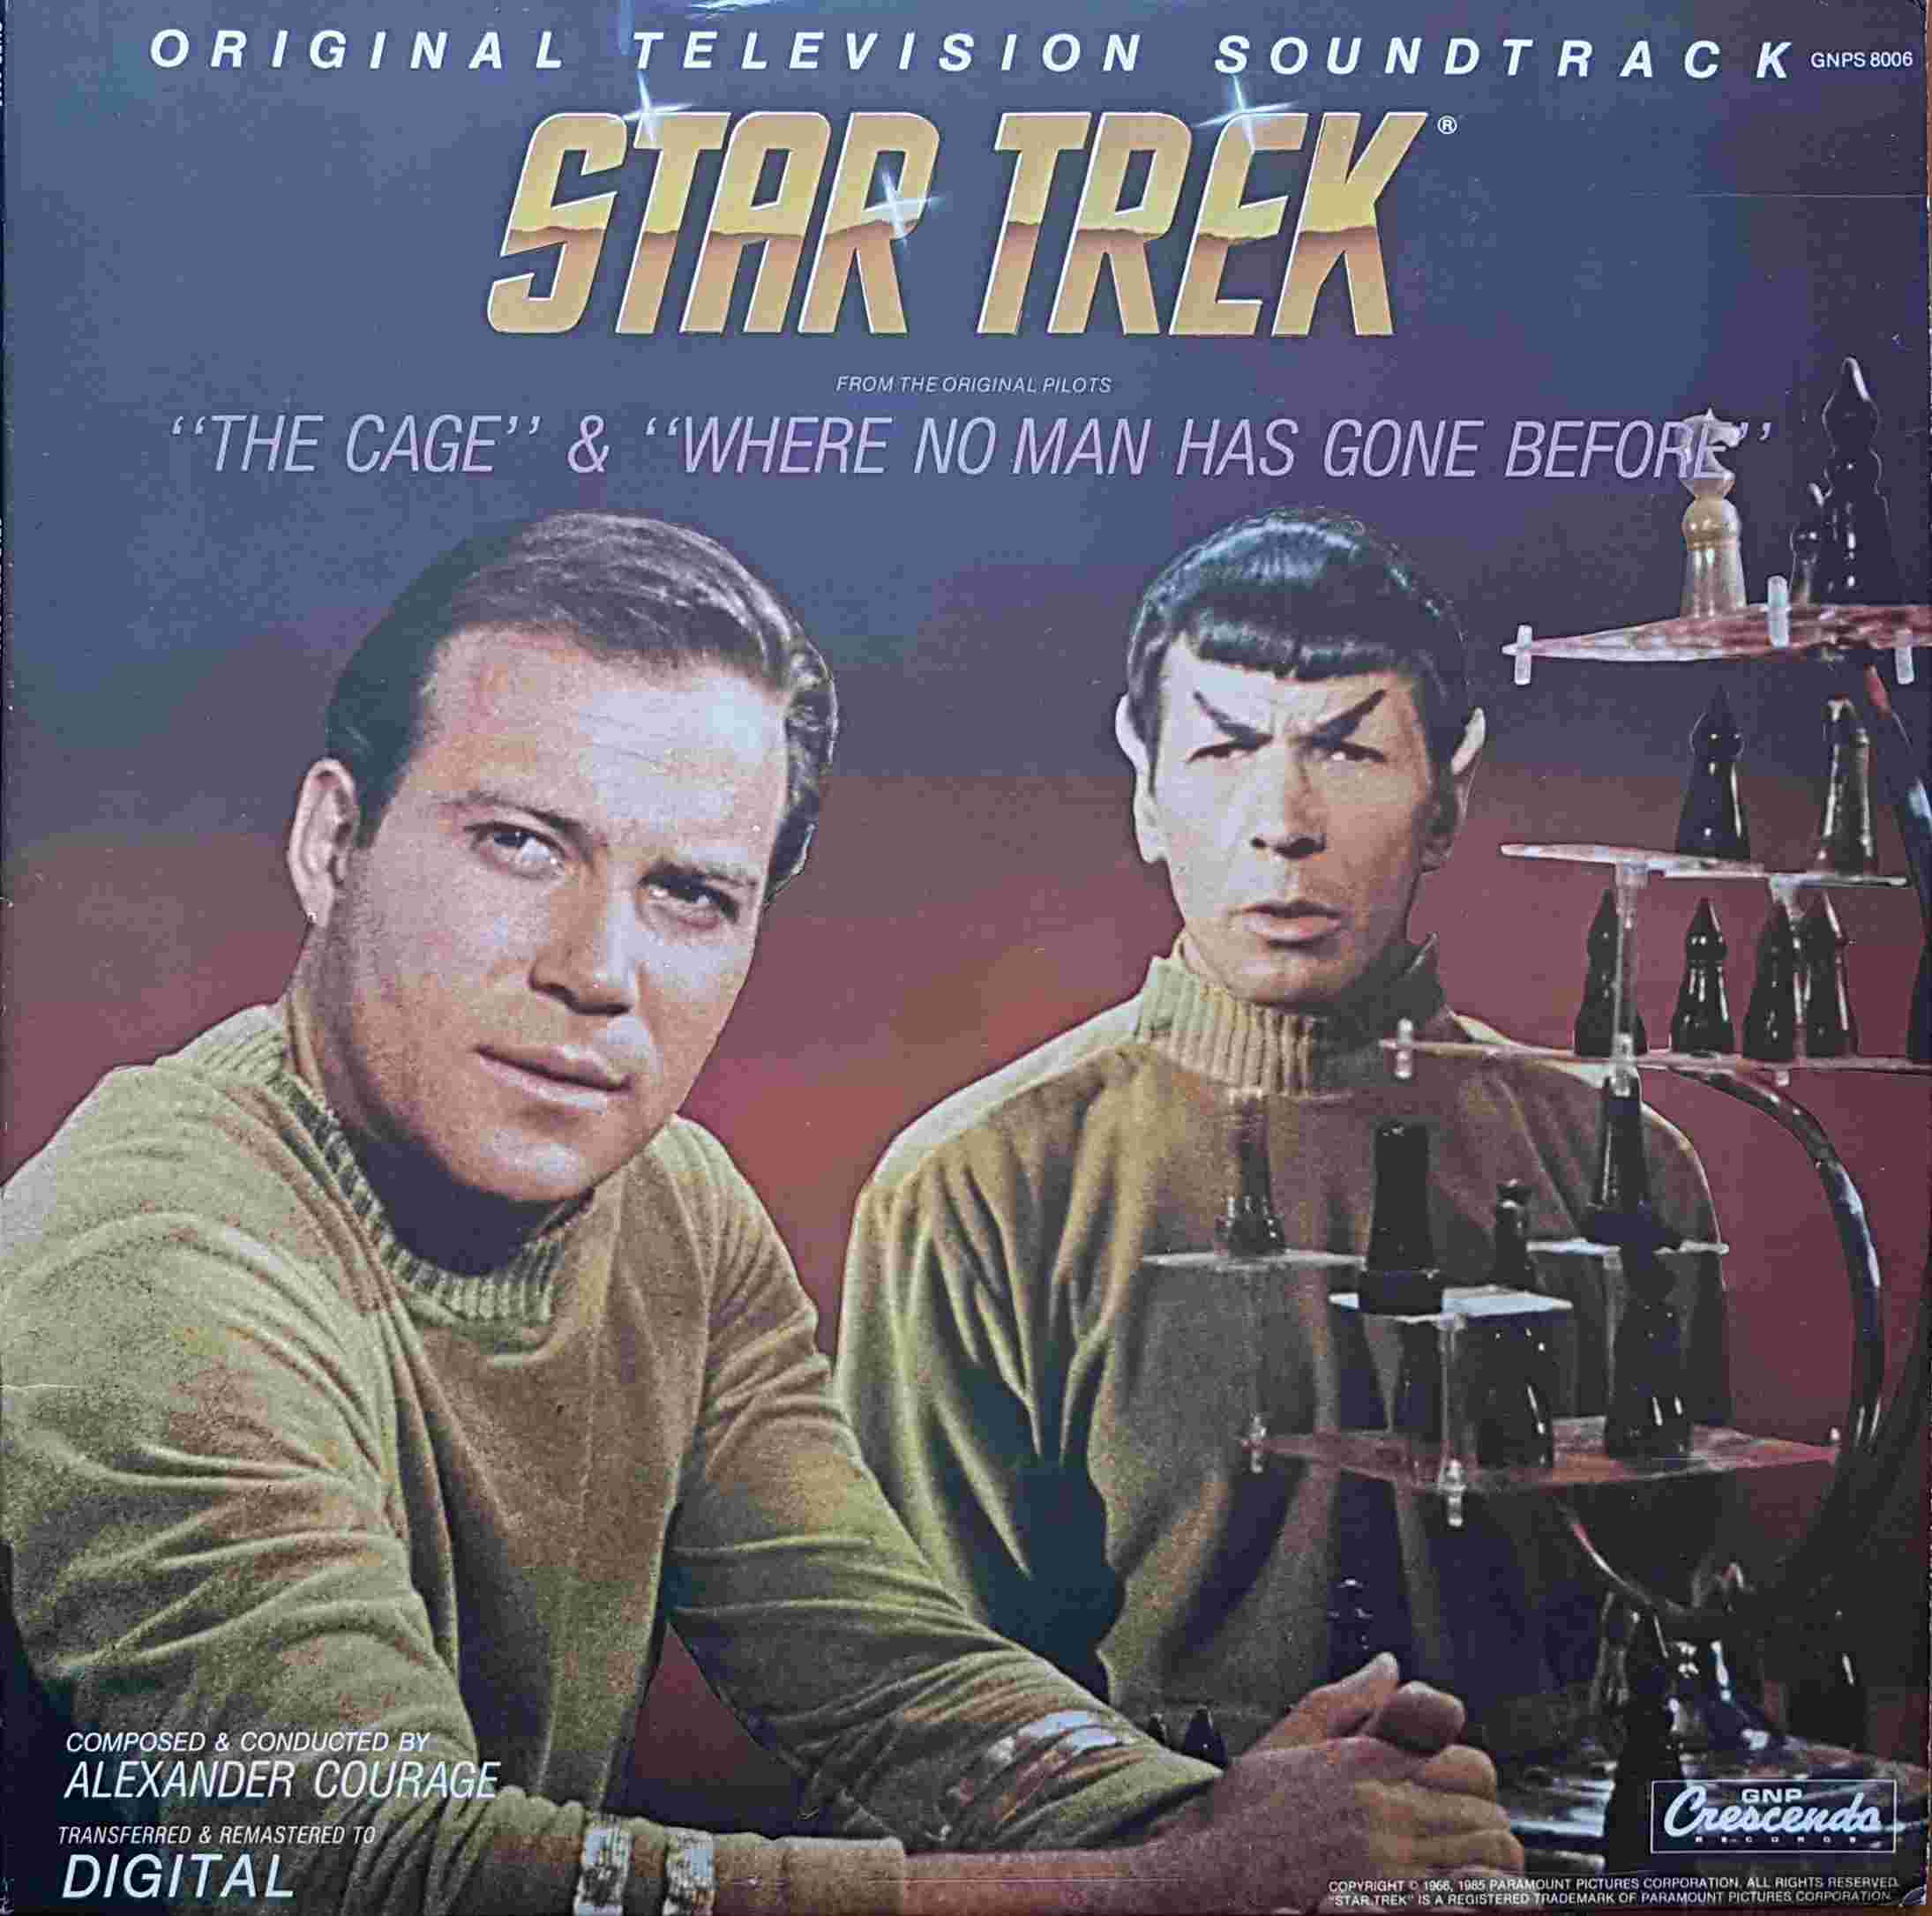 Picture of GNPS 8006 Star trek - US import by artist Alexander Courrage from the BBC albums - Records and Tapes library